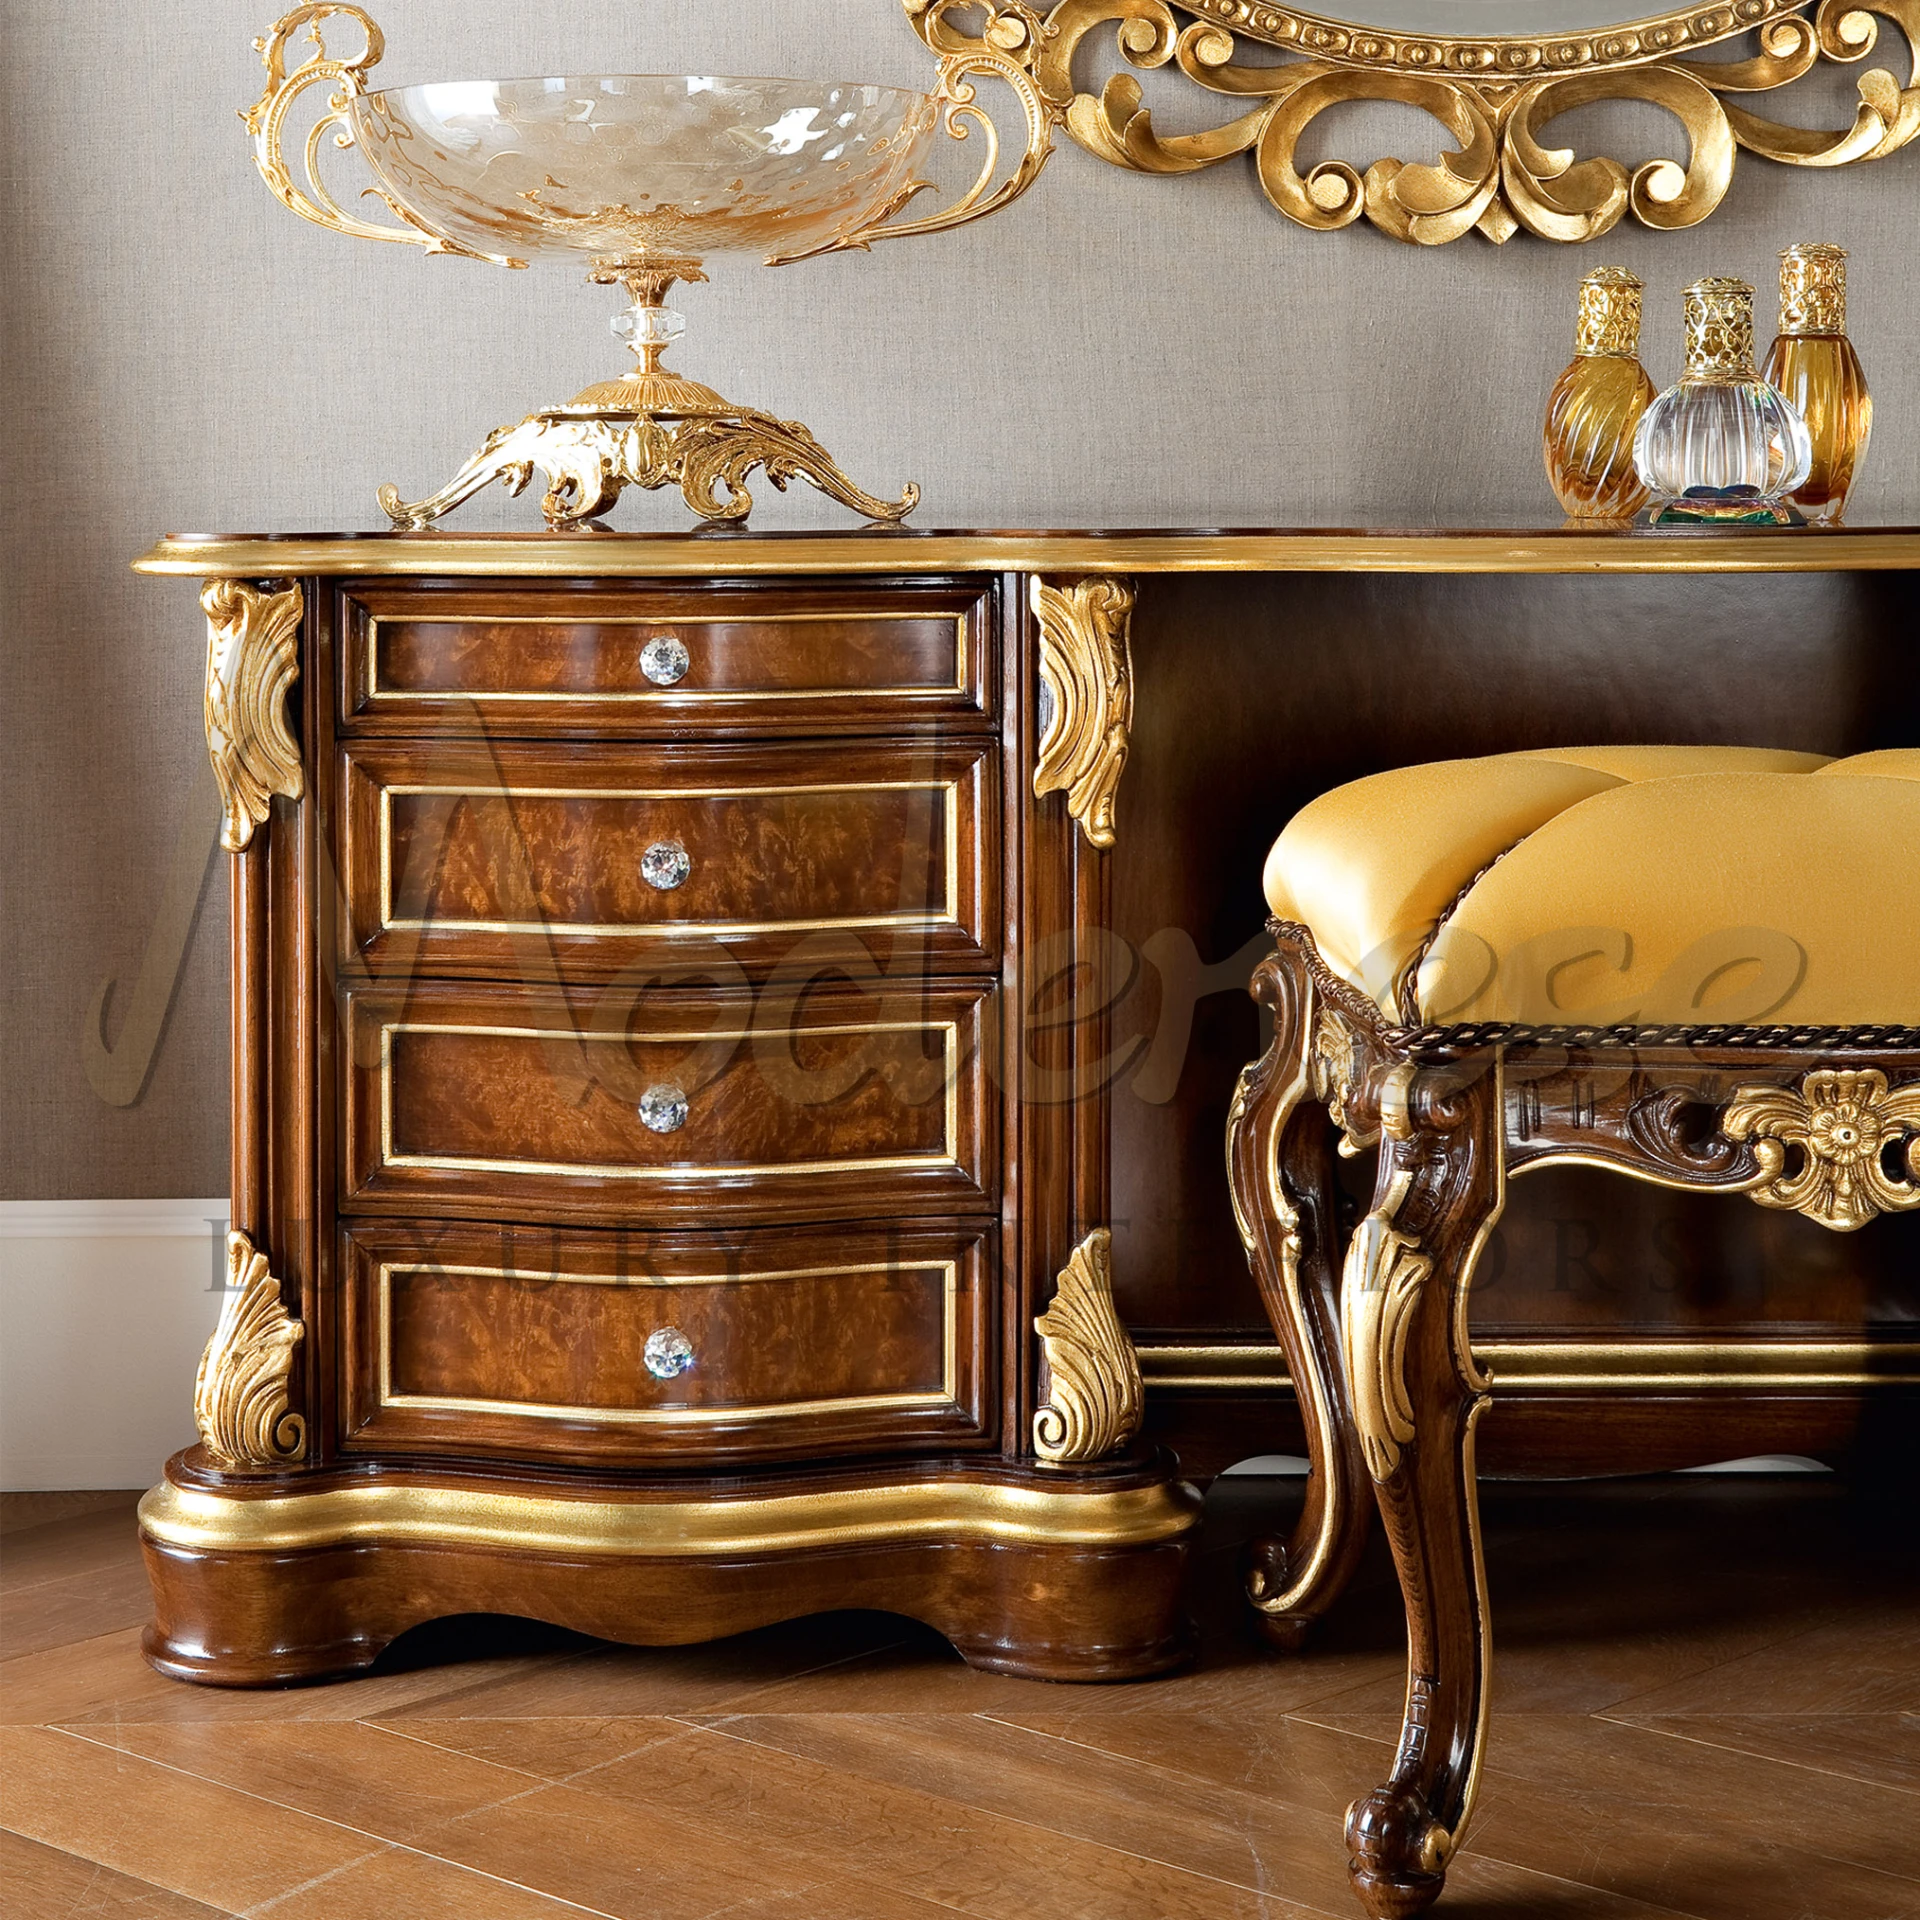 Rich mahogany dressing table with gold leaf accents, crystal drawer knobs, and a cushioned stool in a matching design, complemented by an ornate gold centerpiece bowl.